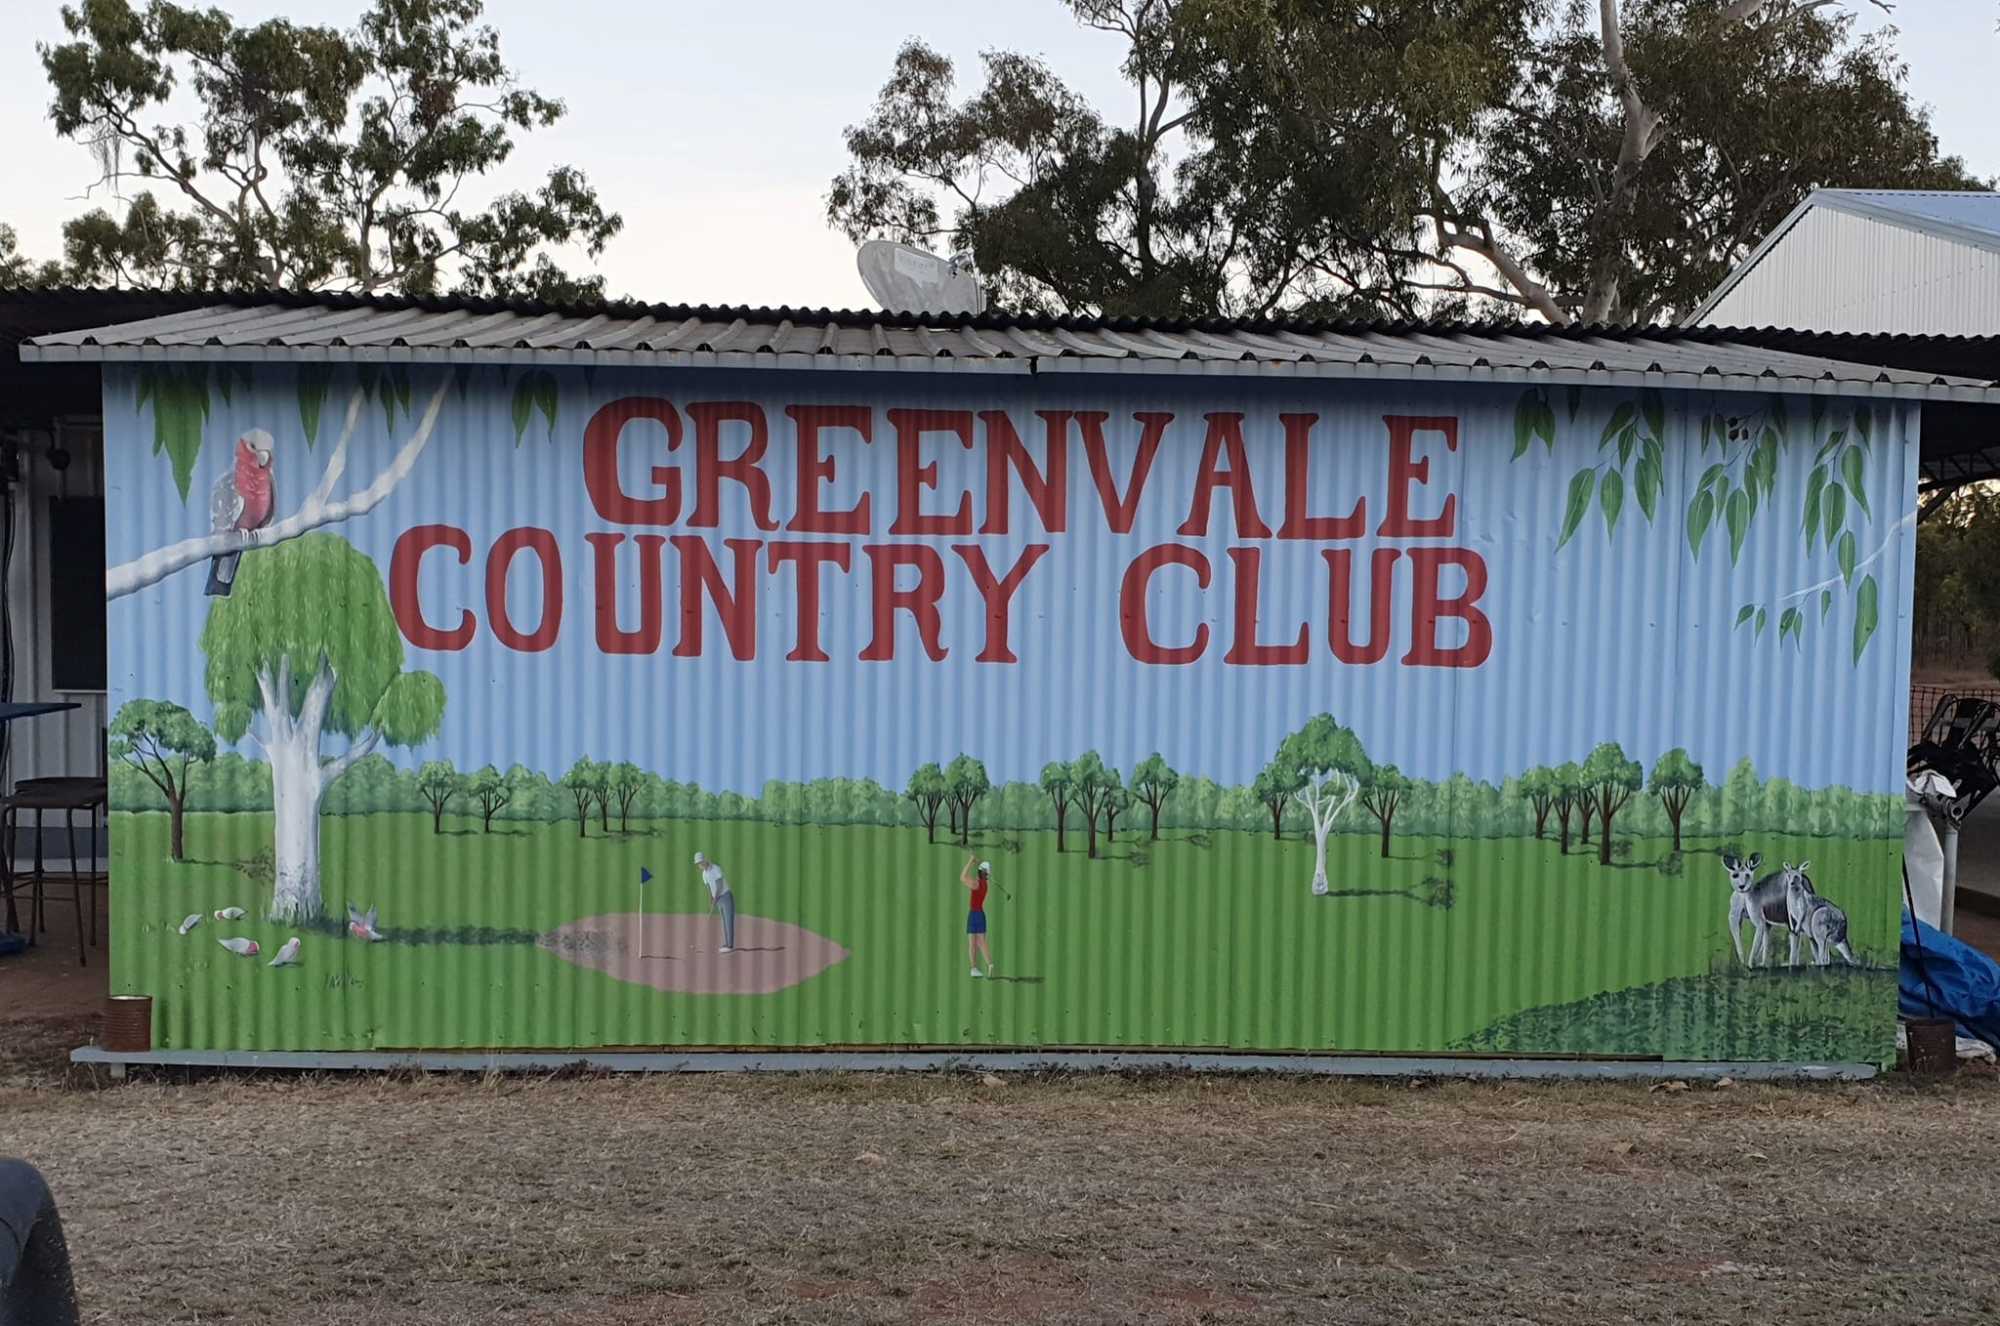 Greenvale clubhouse